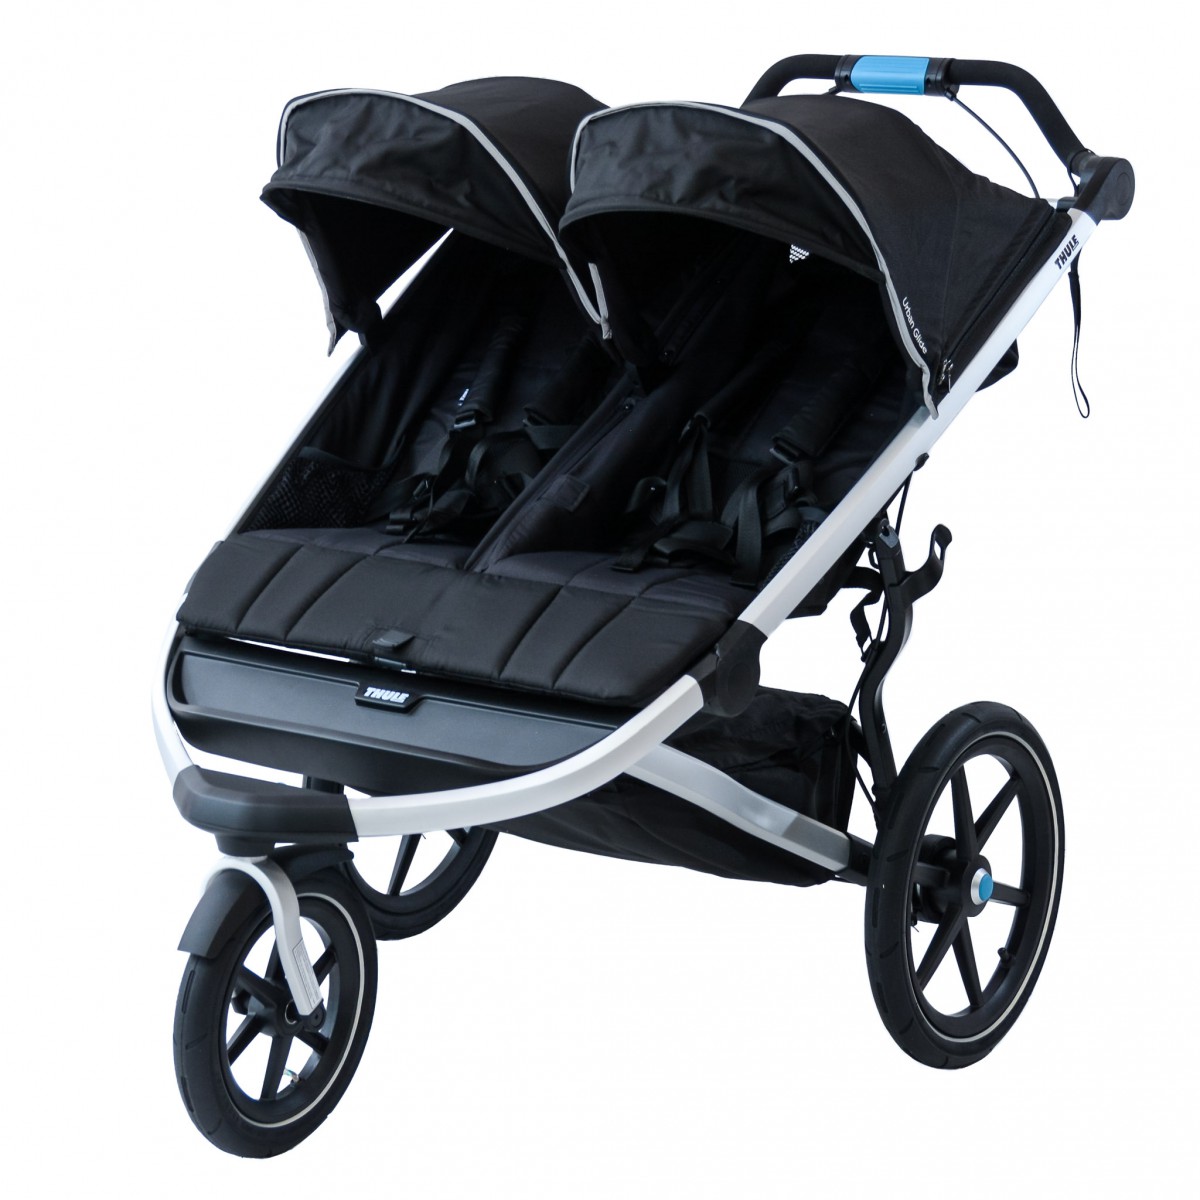 thule urban glide 2 double double stroller review